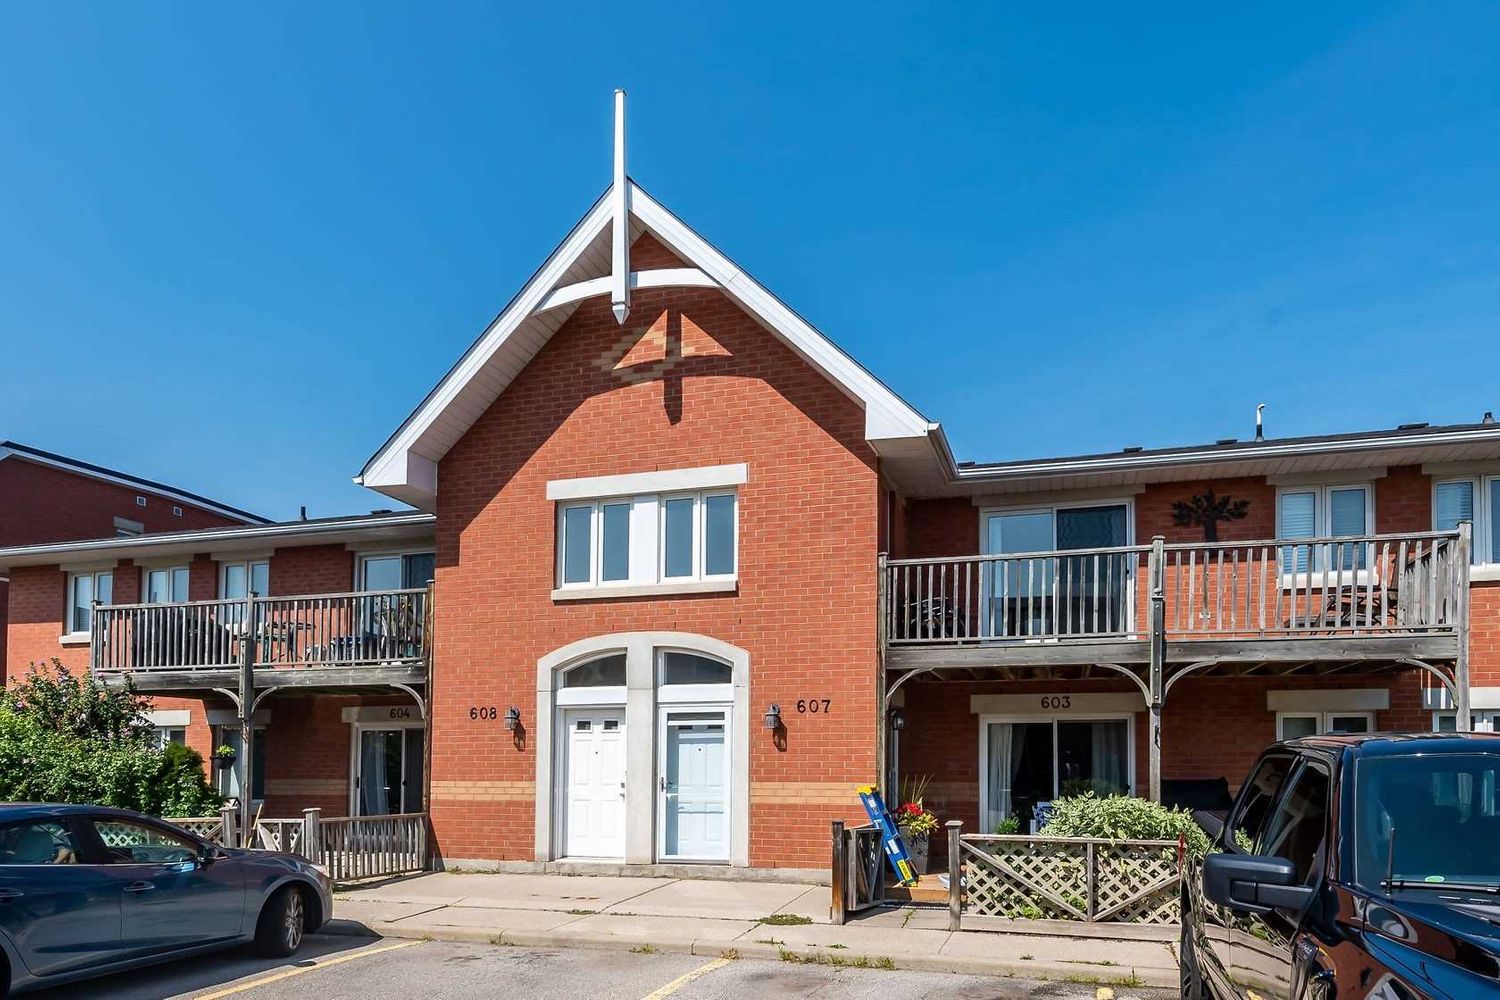 4140 Foxwood Drive. 4140 Foxwood Drive Townhomes is located in  Burlington, Toronto - image #1 of 2